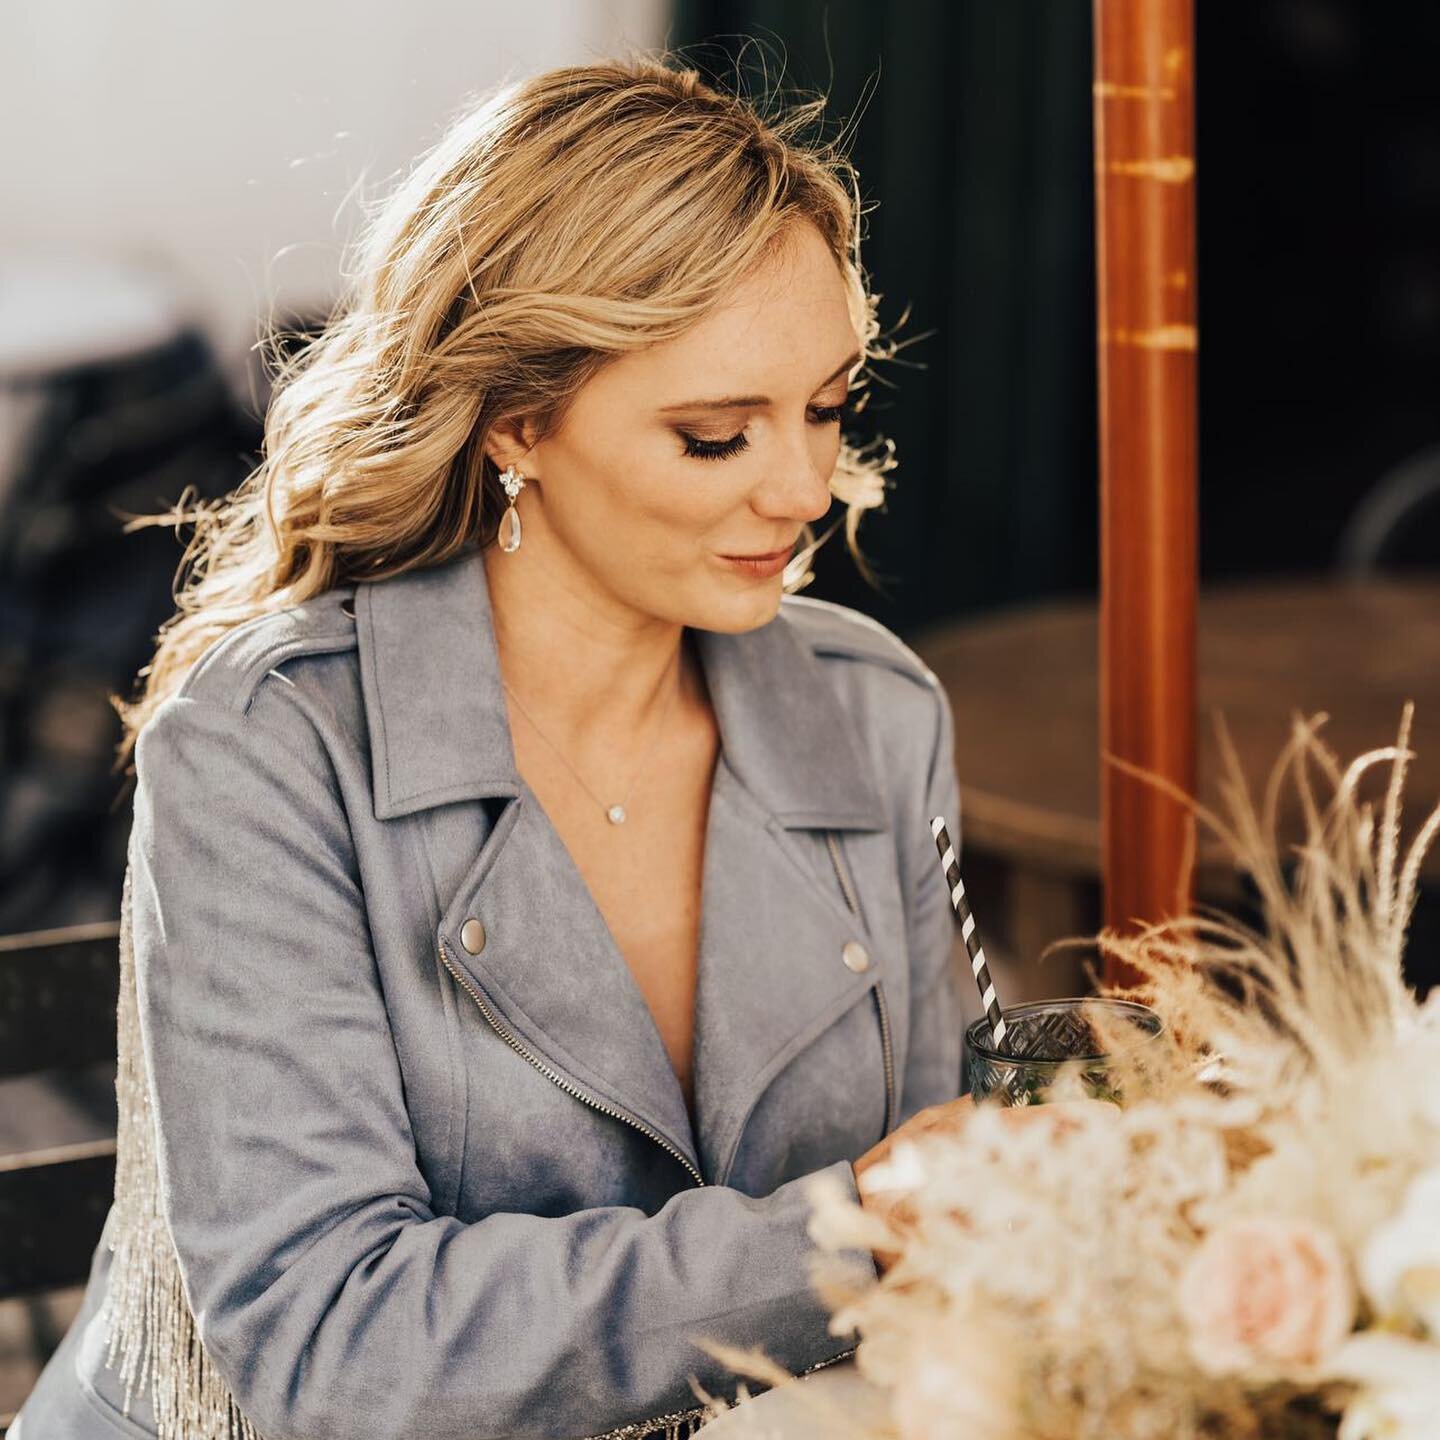 To new beginnings and adventures! 🥂 @whitney__lynne looking lovely on her wedding day💍💙featuring my blue leather &quot;Let the Adventure Begin&quot; jacket. ⁠
⁠
Visit the link in my bio or DM me for custom bridal jackets, disco balls, and gifts. P